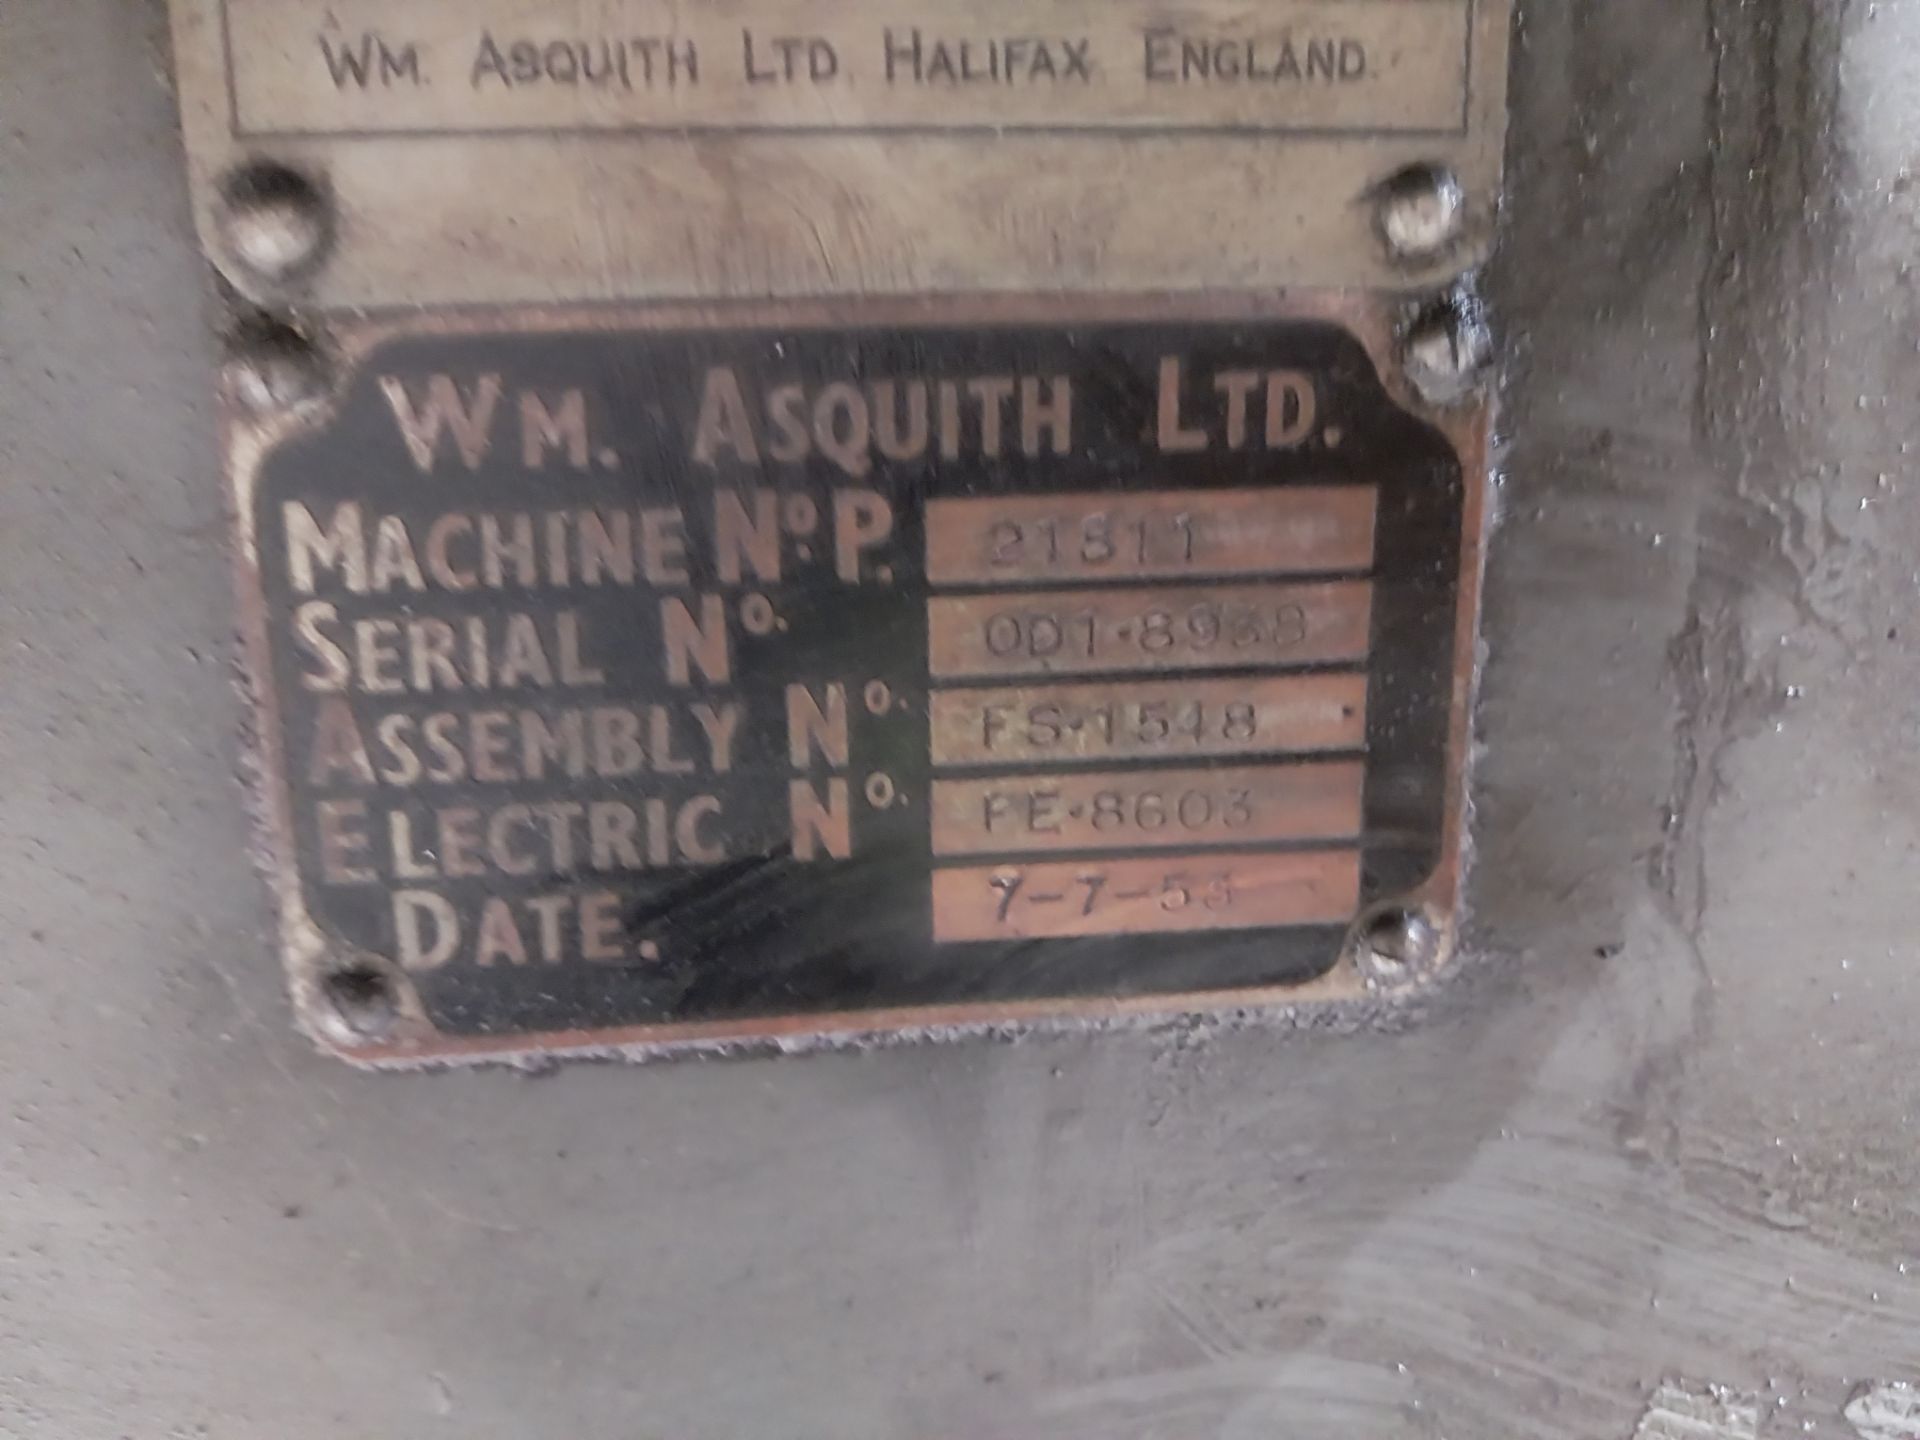 Asquith 21811 radial arm drill with steel block, Serial number 001. 8938, assembly no. FS1548, - Image 5 of 8